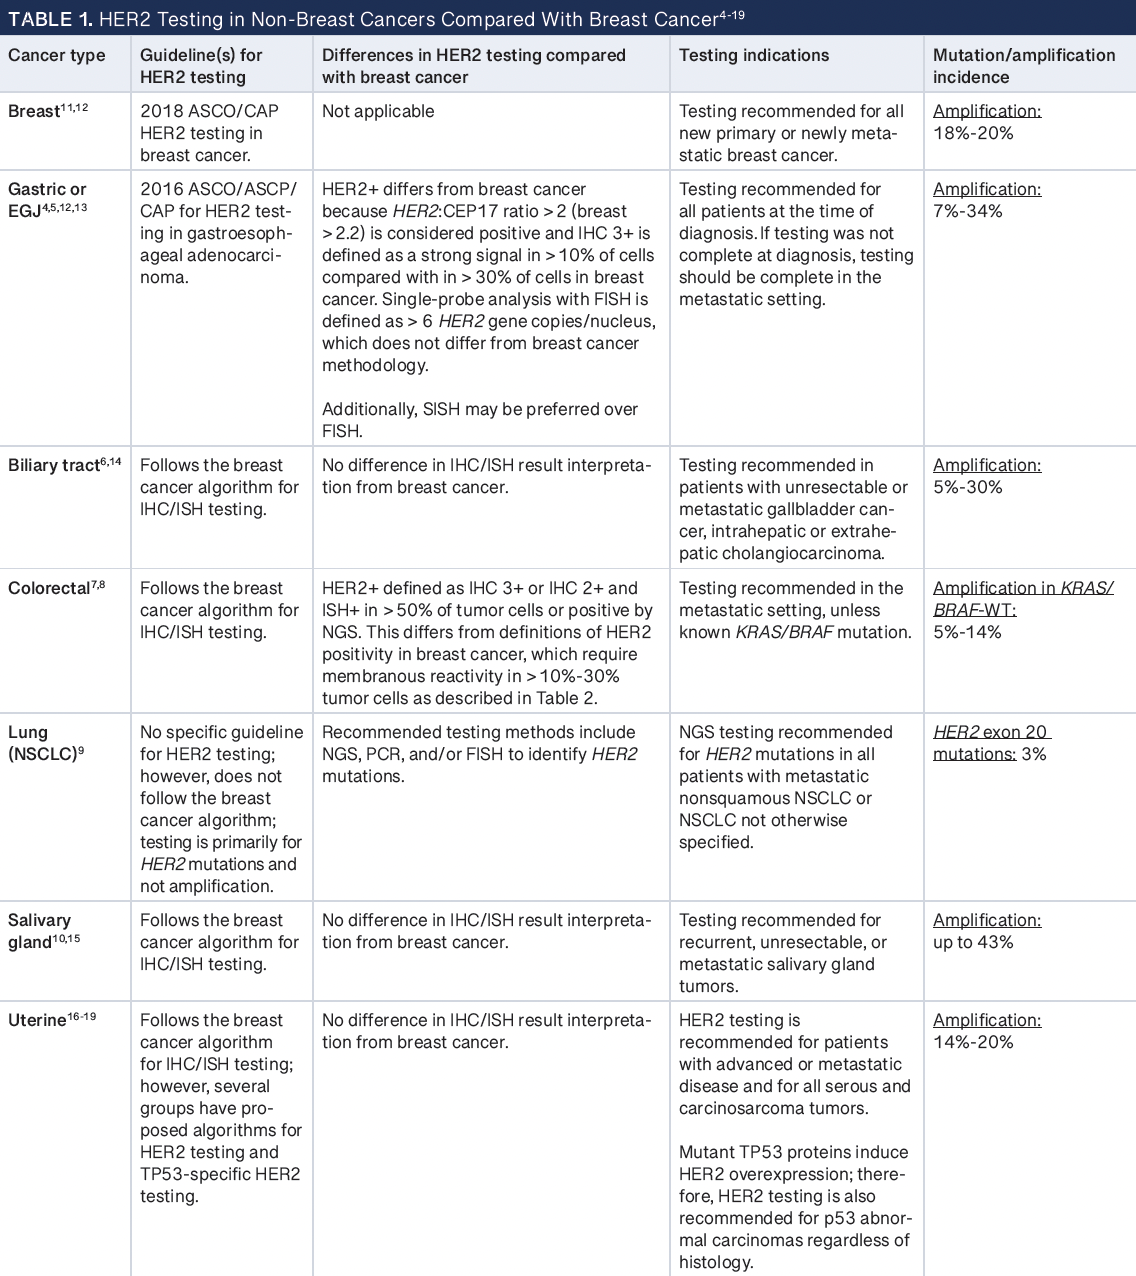 Table 1: HER2 Testing in Non-Breast Cancers Compared With Breast Cancer -- ASCO, American Society of Clinical Oncology; ASCP, American Society of Consultant Pharmacists; CAP, College of American Pathologists; EGJ, esophagogastric junction; FISH, fluorescence in situ hybridization; IHC, immunohistochemistry; ISH, in situ hybridization; NGS, next-generation sequencing; NSCLC, non–small cell lung cancer; PCR, polymerase chain reaction; SISH, silver in situ hybridization; WT, wild-type.